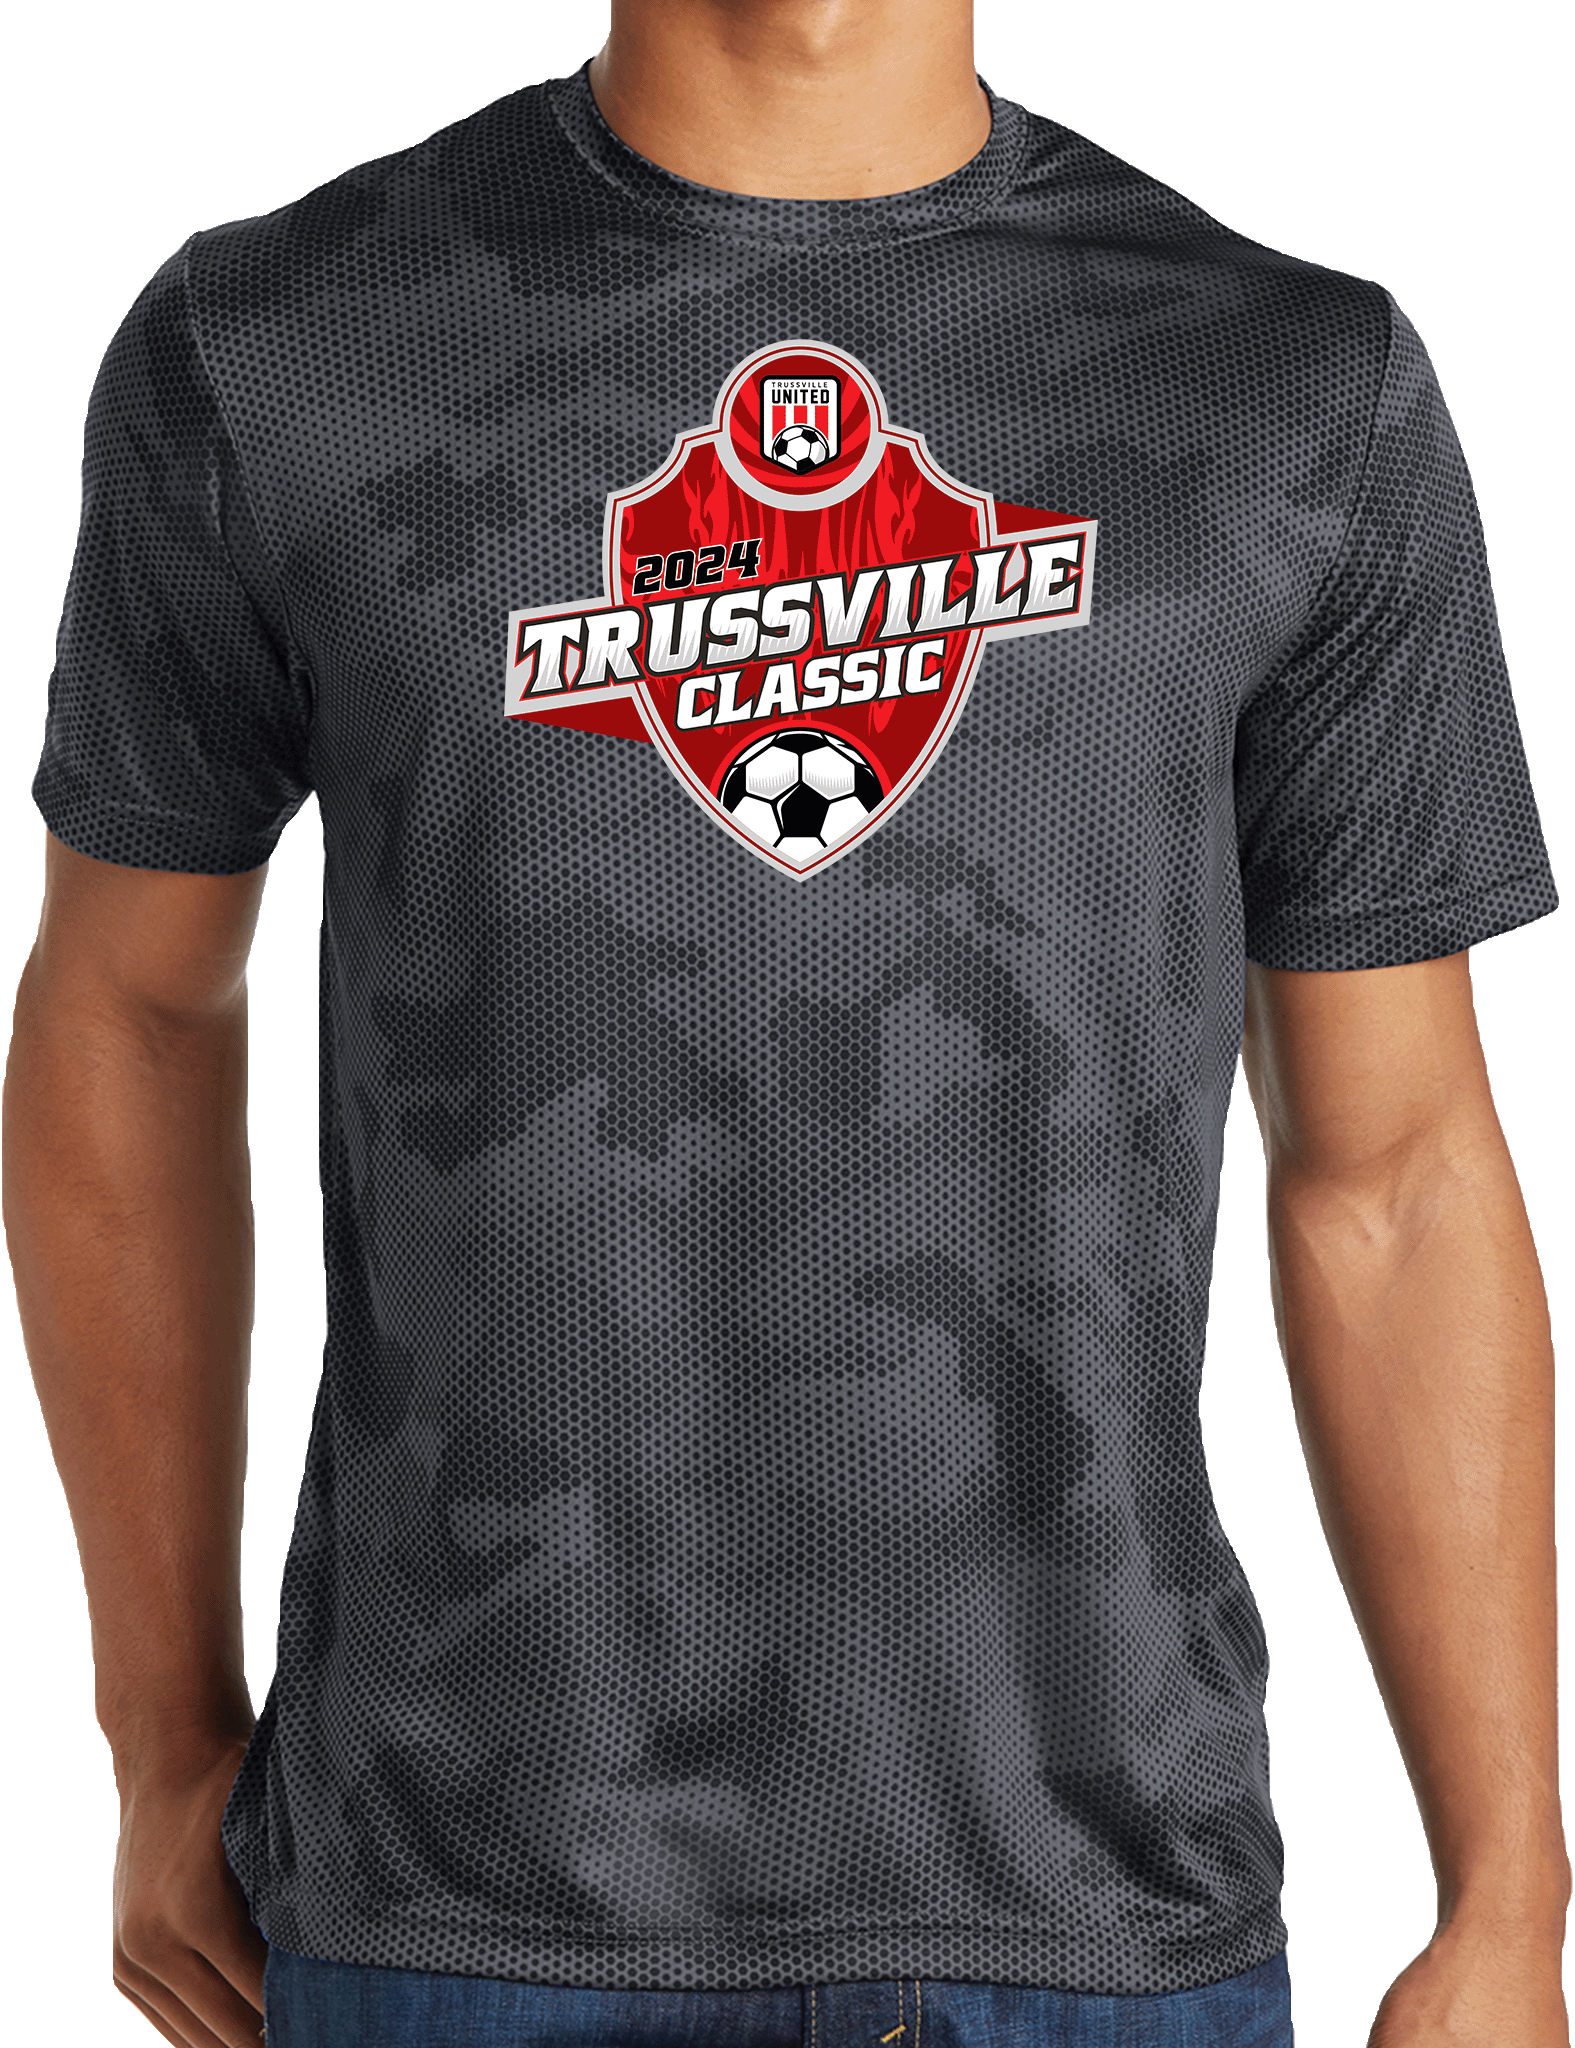 Performance Shirts - 2024 Trussville Classic